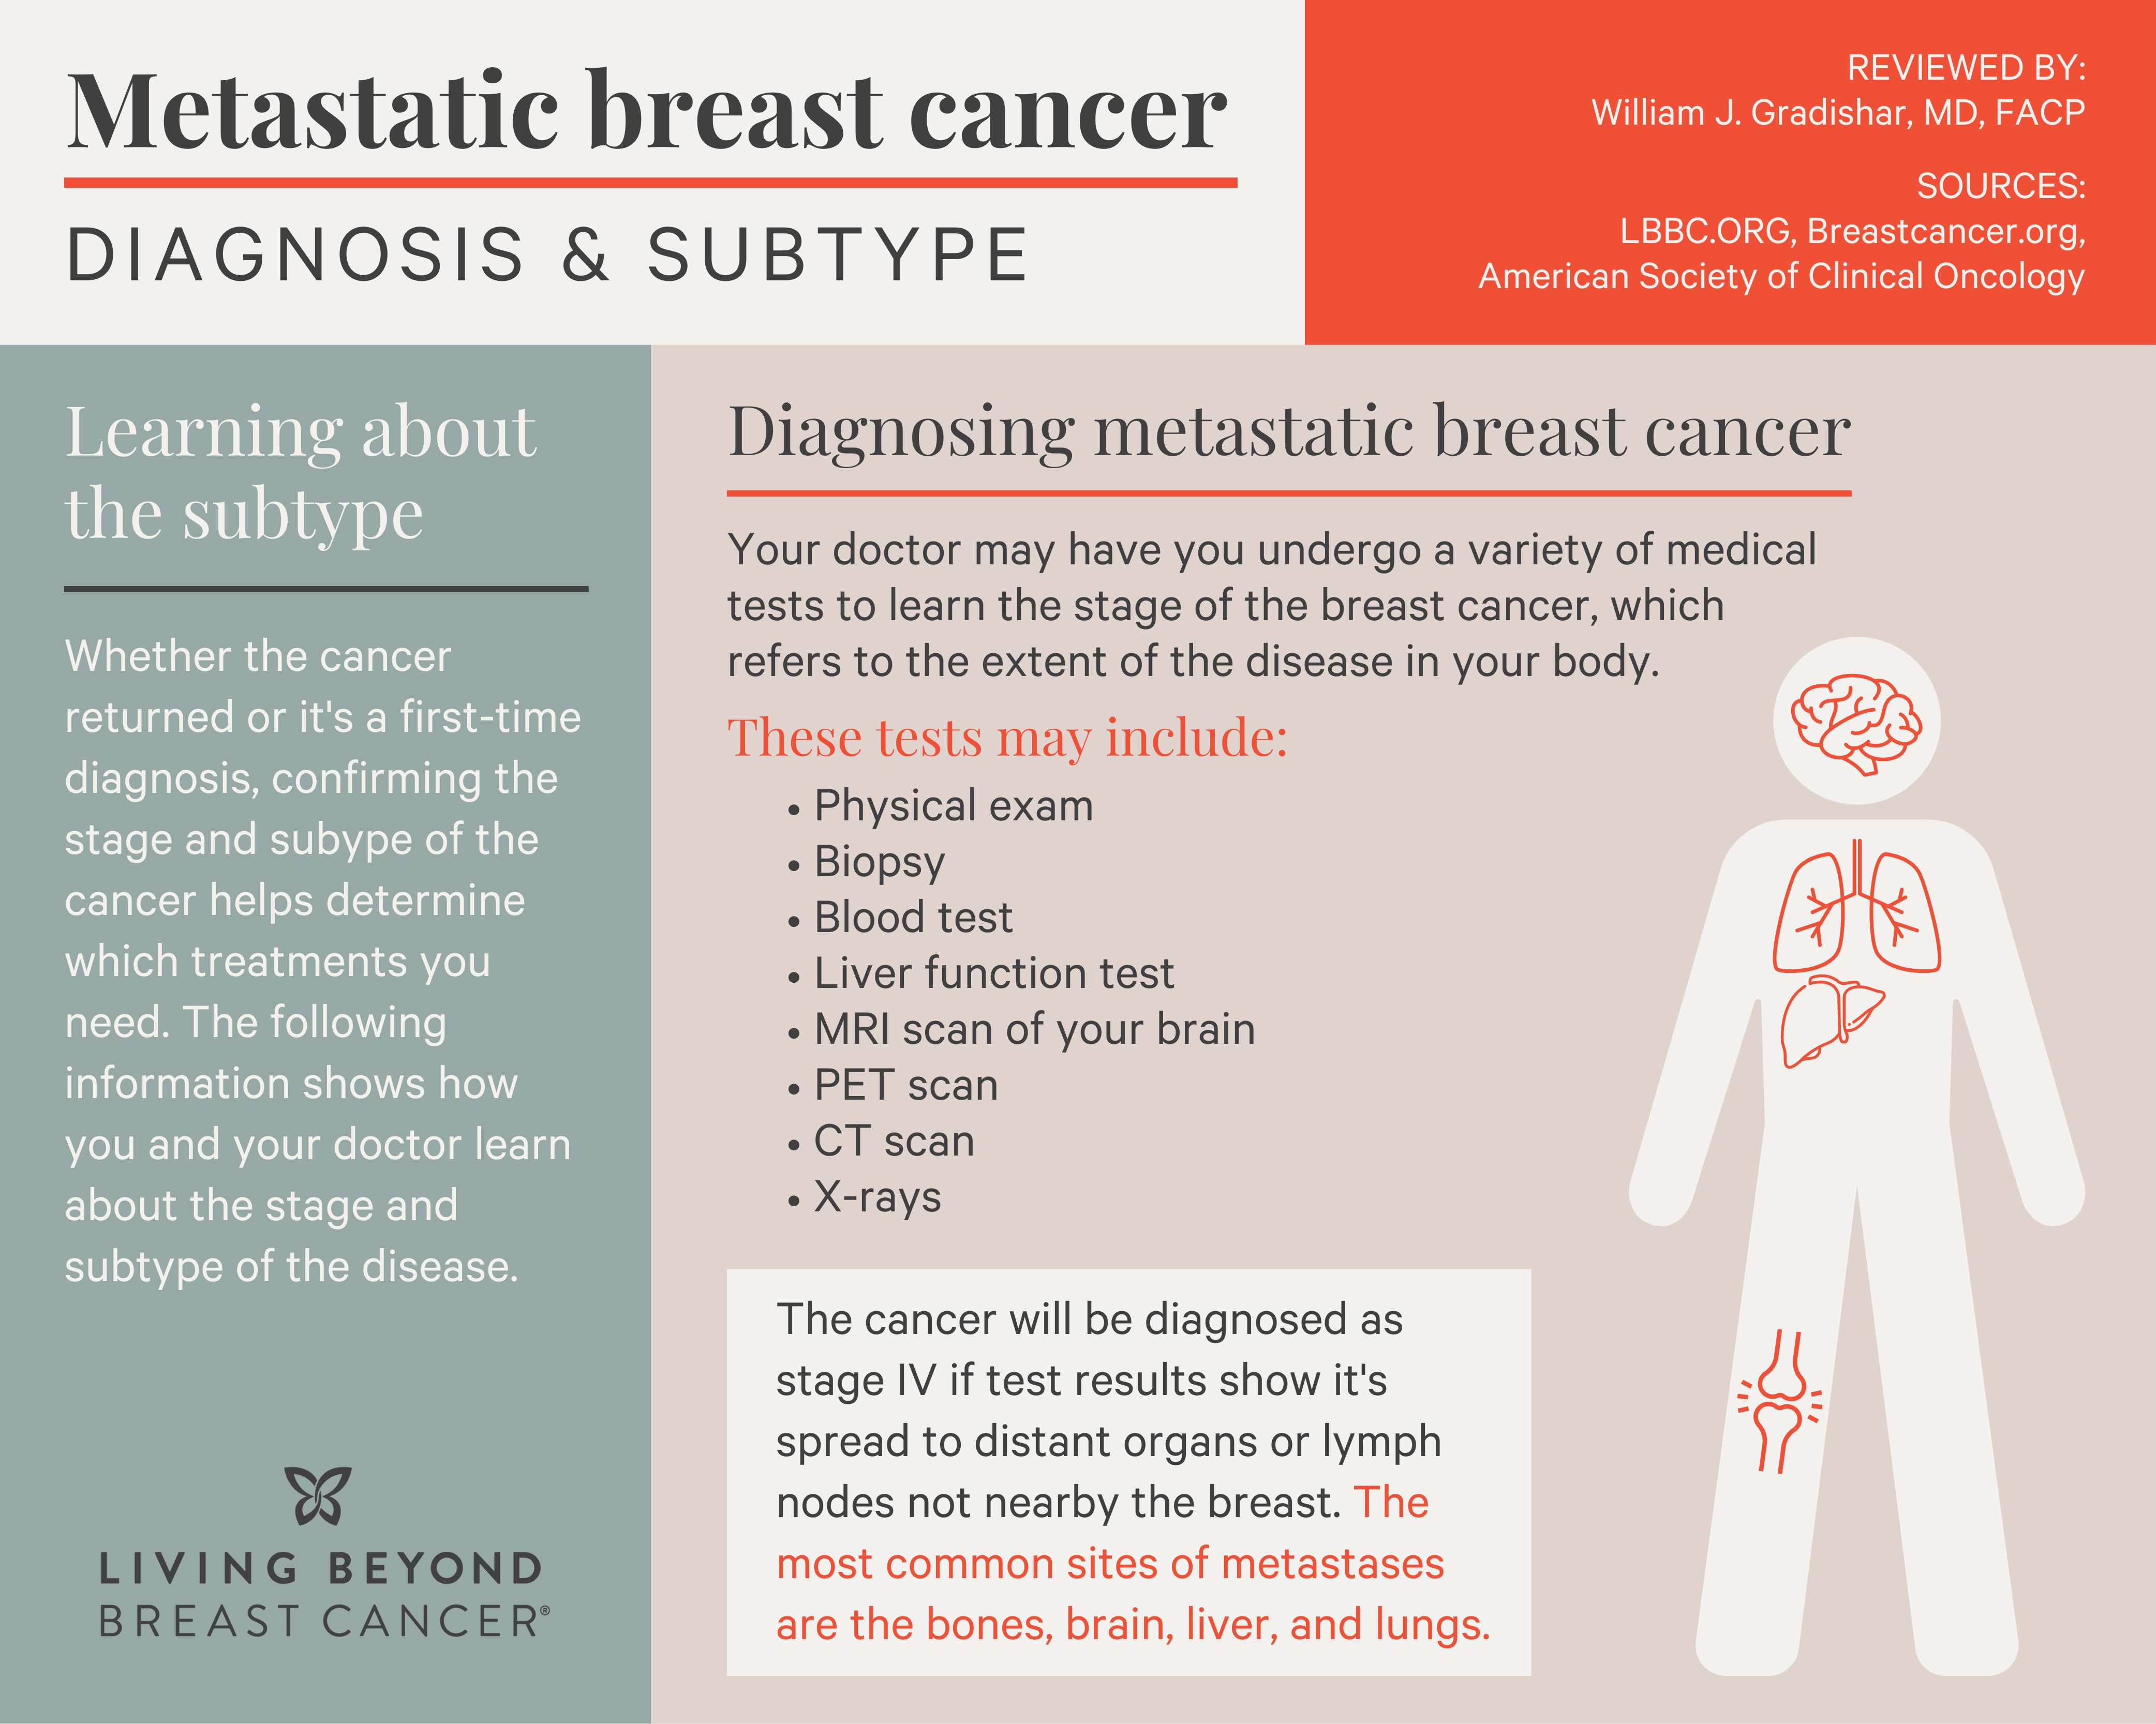 Infographic explaining how metastatic breast cancer is diagnosed and how to learn about the subtype of the cancer. In diagnosing metastatic breast cancer your doctor may have you undergo a variety of test to learn the stage of the breast cancer, which refers to the extent of the disease in your body. There is a silhouette graphic of a body showing the different organs that metastatic breast most commonly spreads to. These include the bones, brain, liver, and lungs. Confirming the stage and subtype of the cancer helps determine which treatments you need.